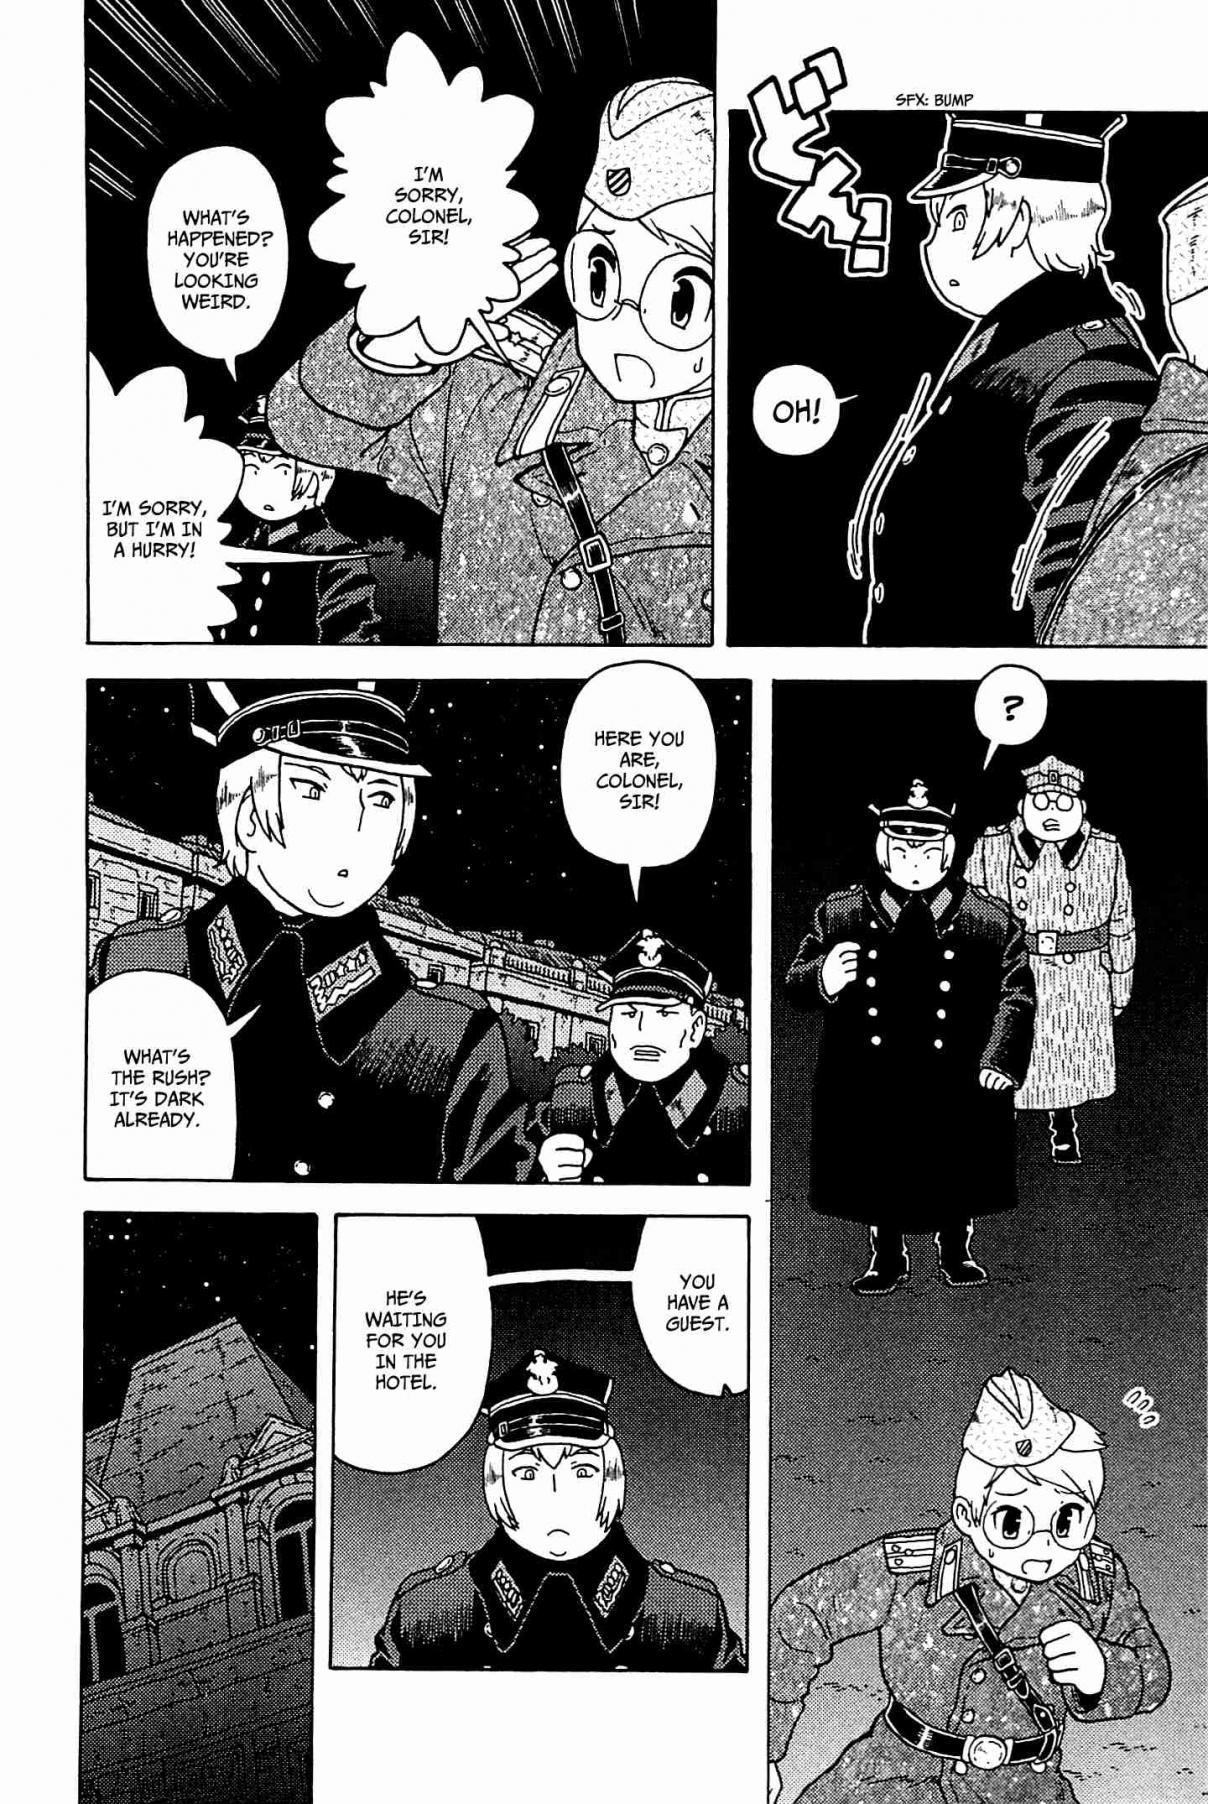 Guns and Stamps Vol. 4 Ch. 29 Memories of the Past